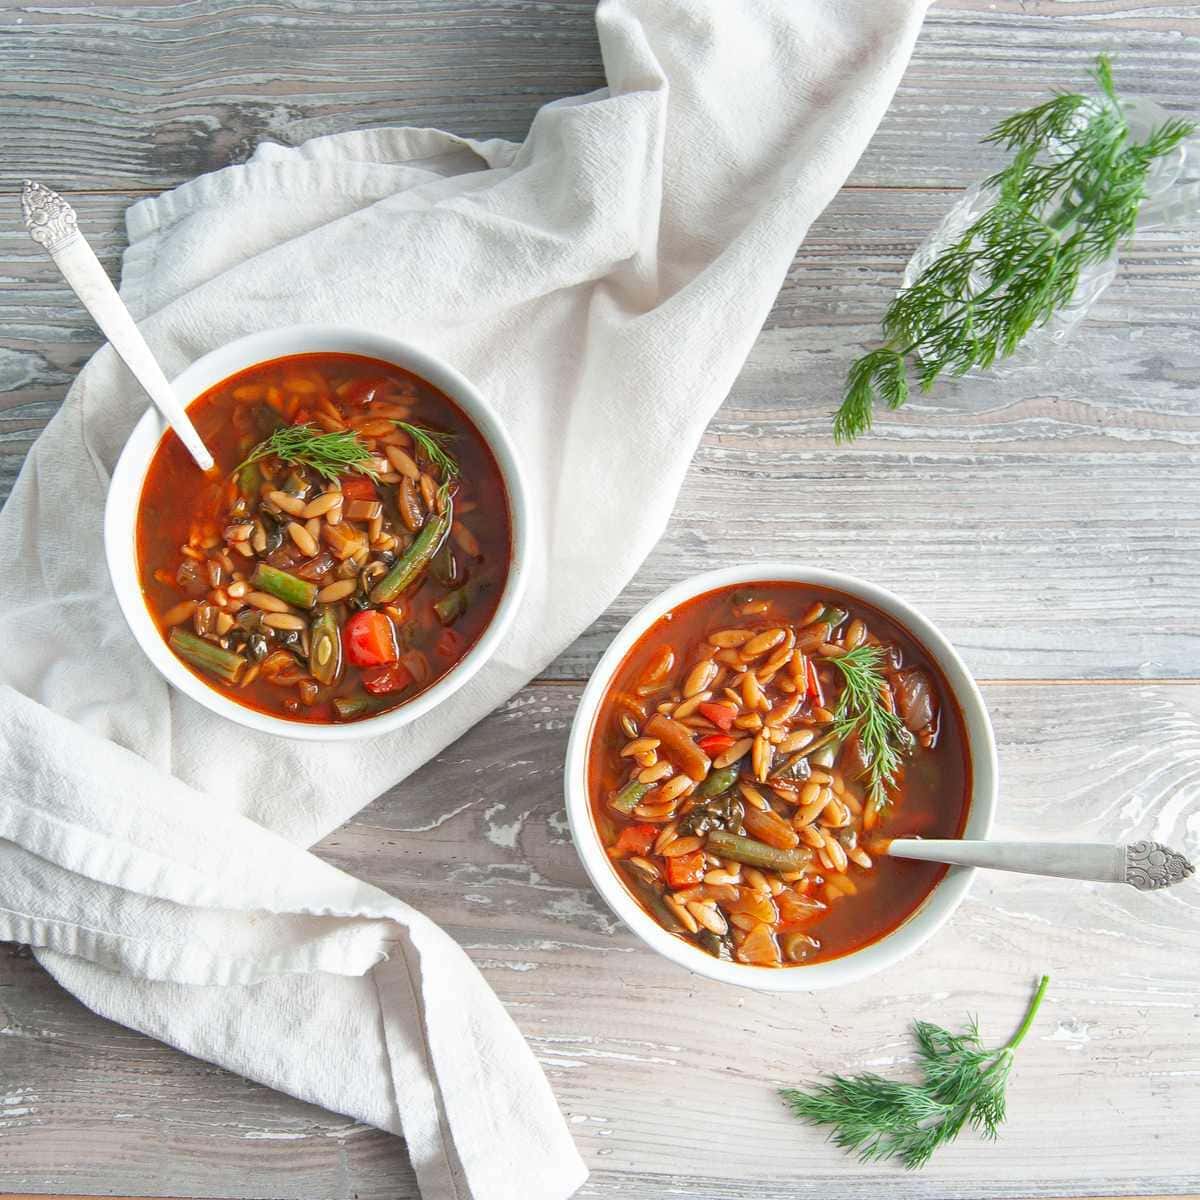 Two bowls of vegetable soup with orzo on kitchen towel